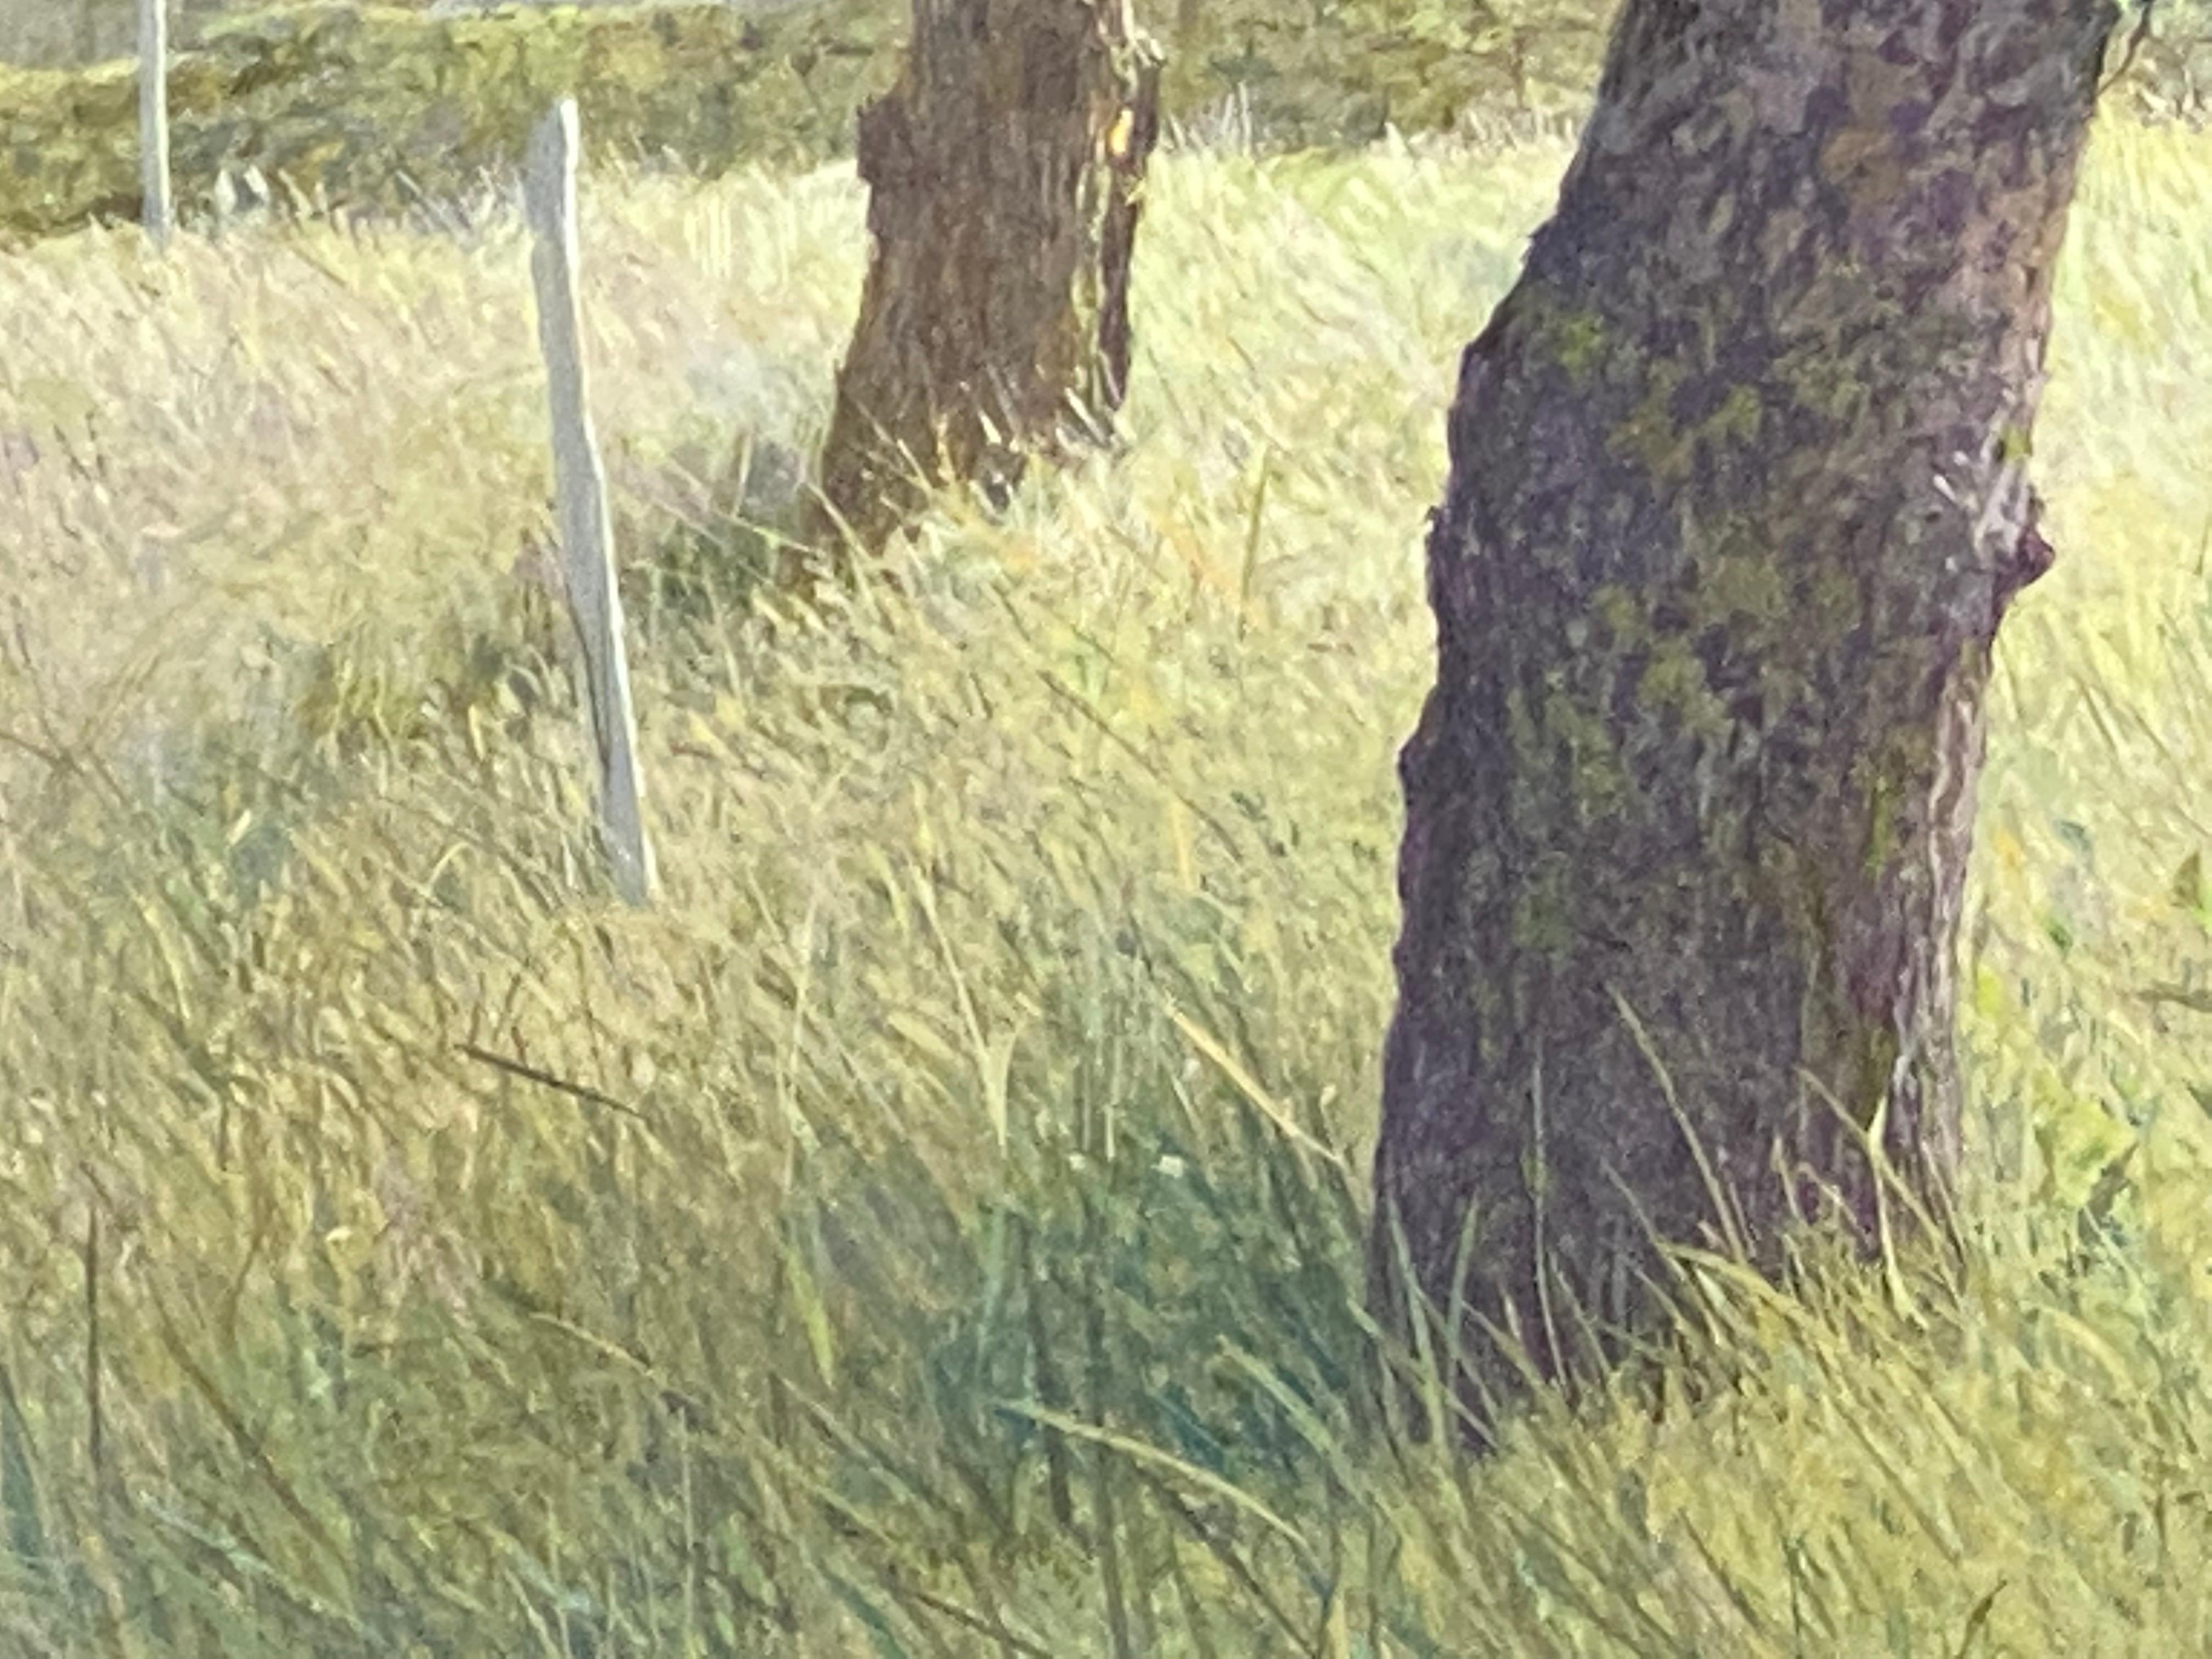 Peter Durieux
Overgrown Tree
27 x 60 cm
* (Framed in silver metallic wooden frame, included, 34 x 67 cm)

This painting is made by Dutch artist Peter Durieux. Painting in his studio in Groningen he feels like he is back in the Ardèche in